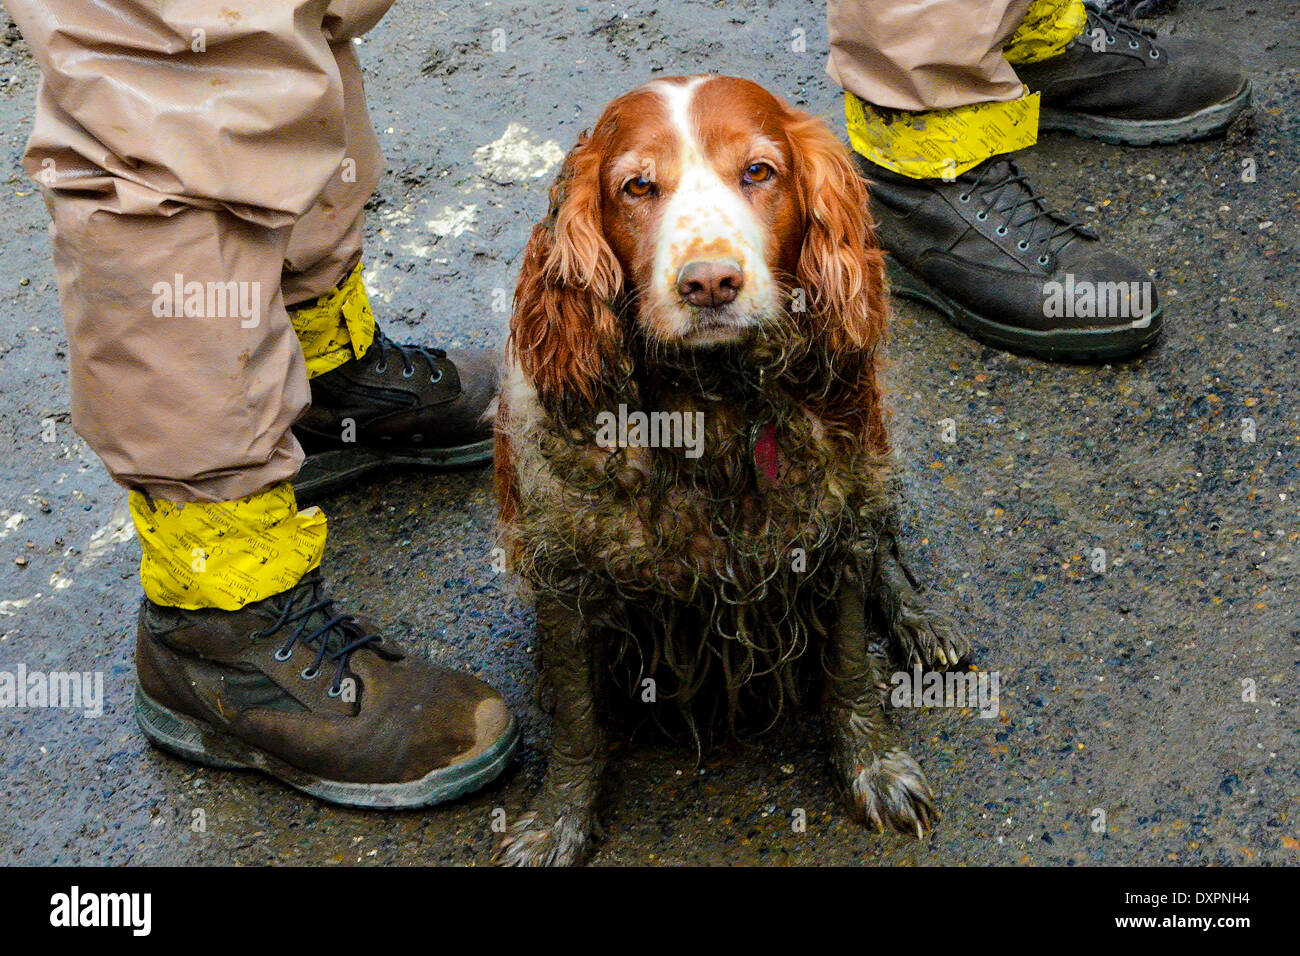 Oso, Washington, USA . 28th Mar, 2014. A search and rescue dog waits to be washed after working in mud to locate victims of a massive landslide that killed at least 28 people and destroyed a small riverside village in northwestern Washington state March 27, 2014 in Oso, Washington. Credit:  Planetpix/Alamy Live News Stock Photo